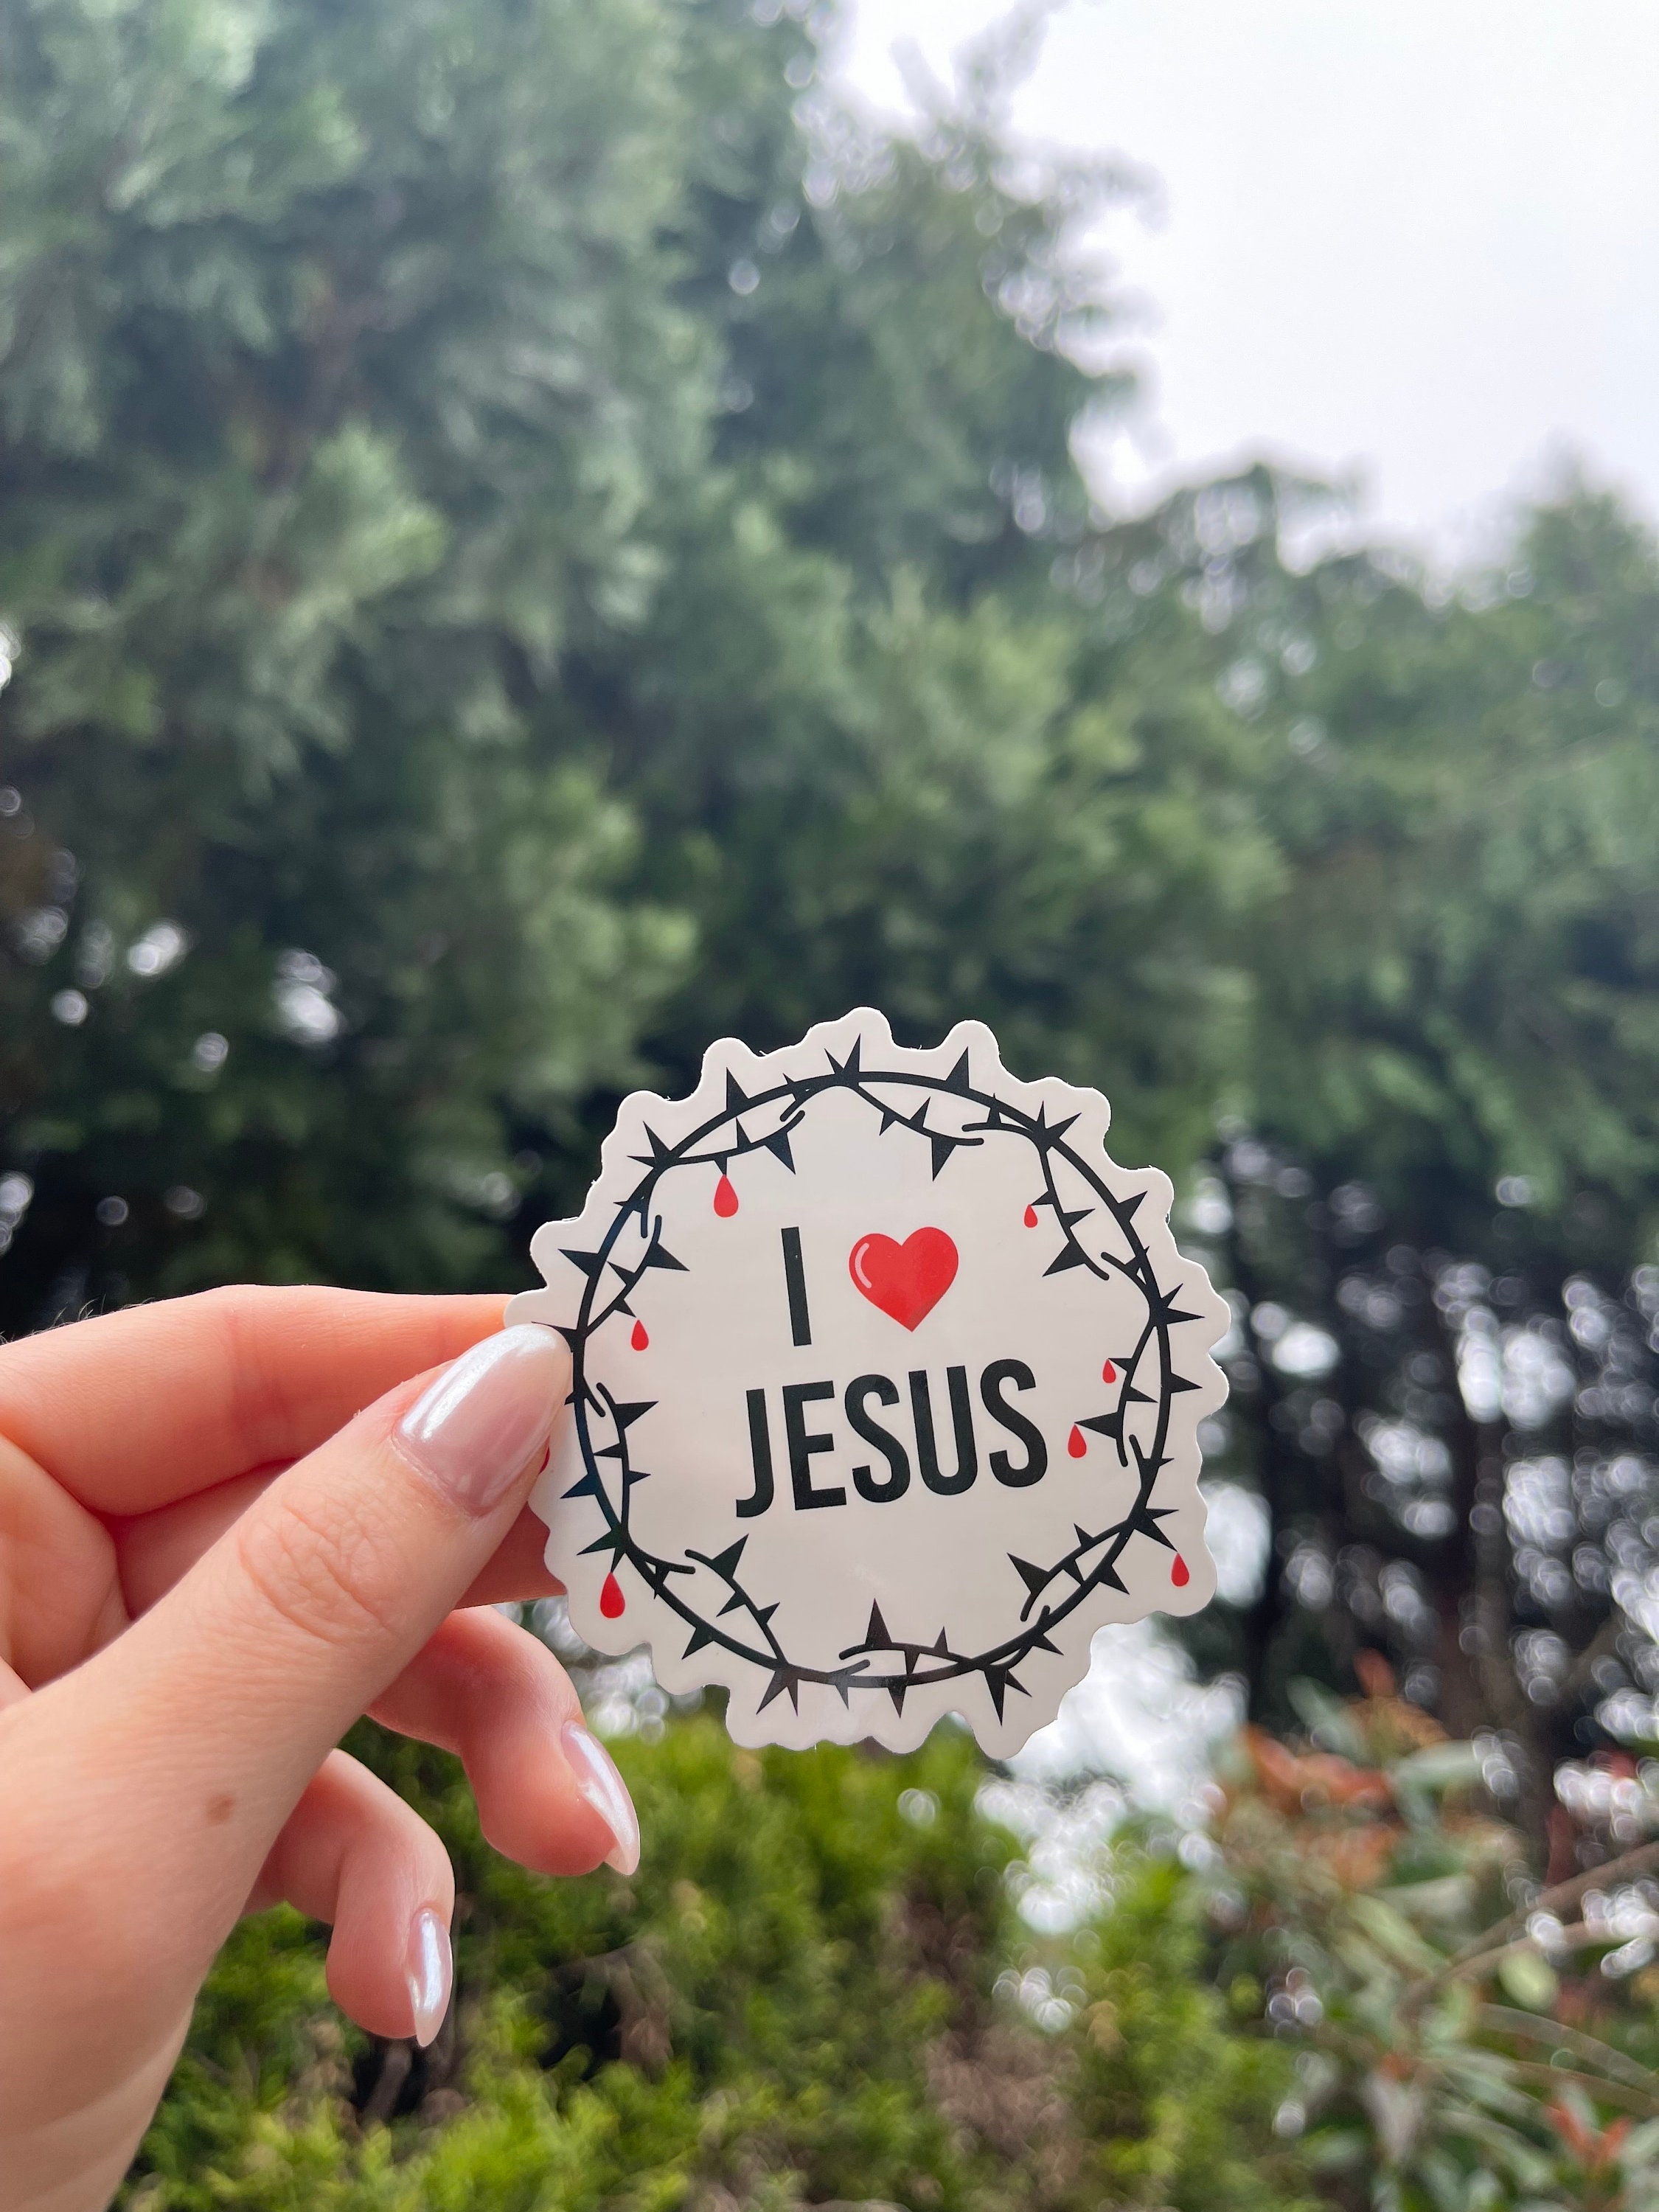 100pcs Christian Stickers Religious,Variety Bible Faith Stickers,Beautiful Jesus and Cross Stickers Inspirational Positive Affirmation Decal Cute